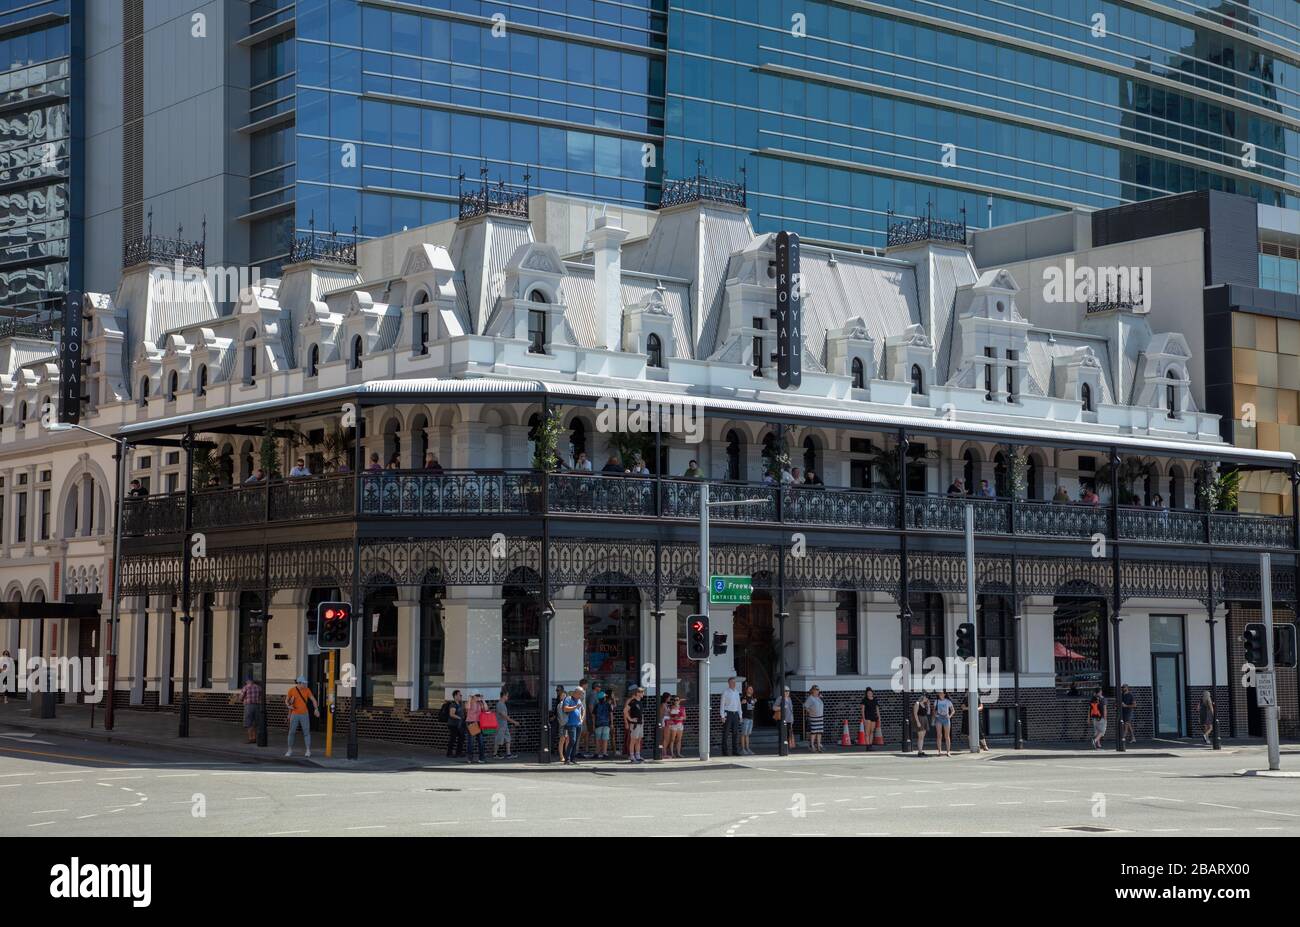 The Royal Hotel seen in Perth, a landmark building in Grand Victorian Second Empire's Style. Stock Photo